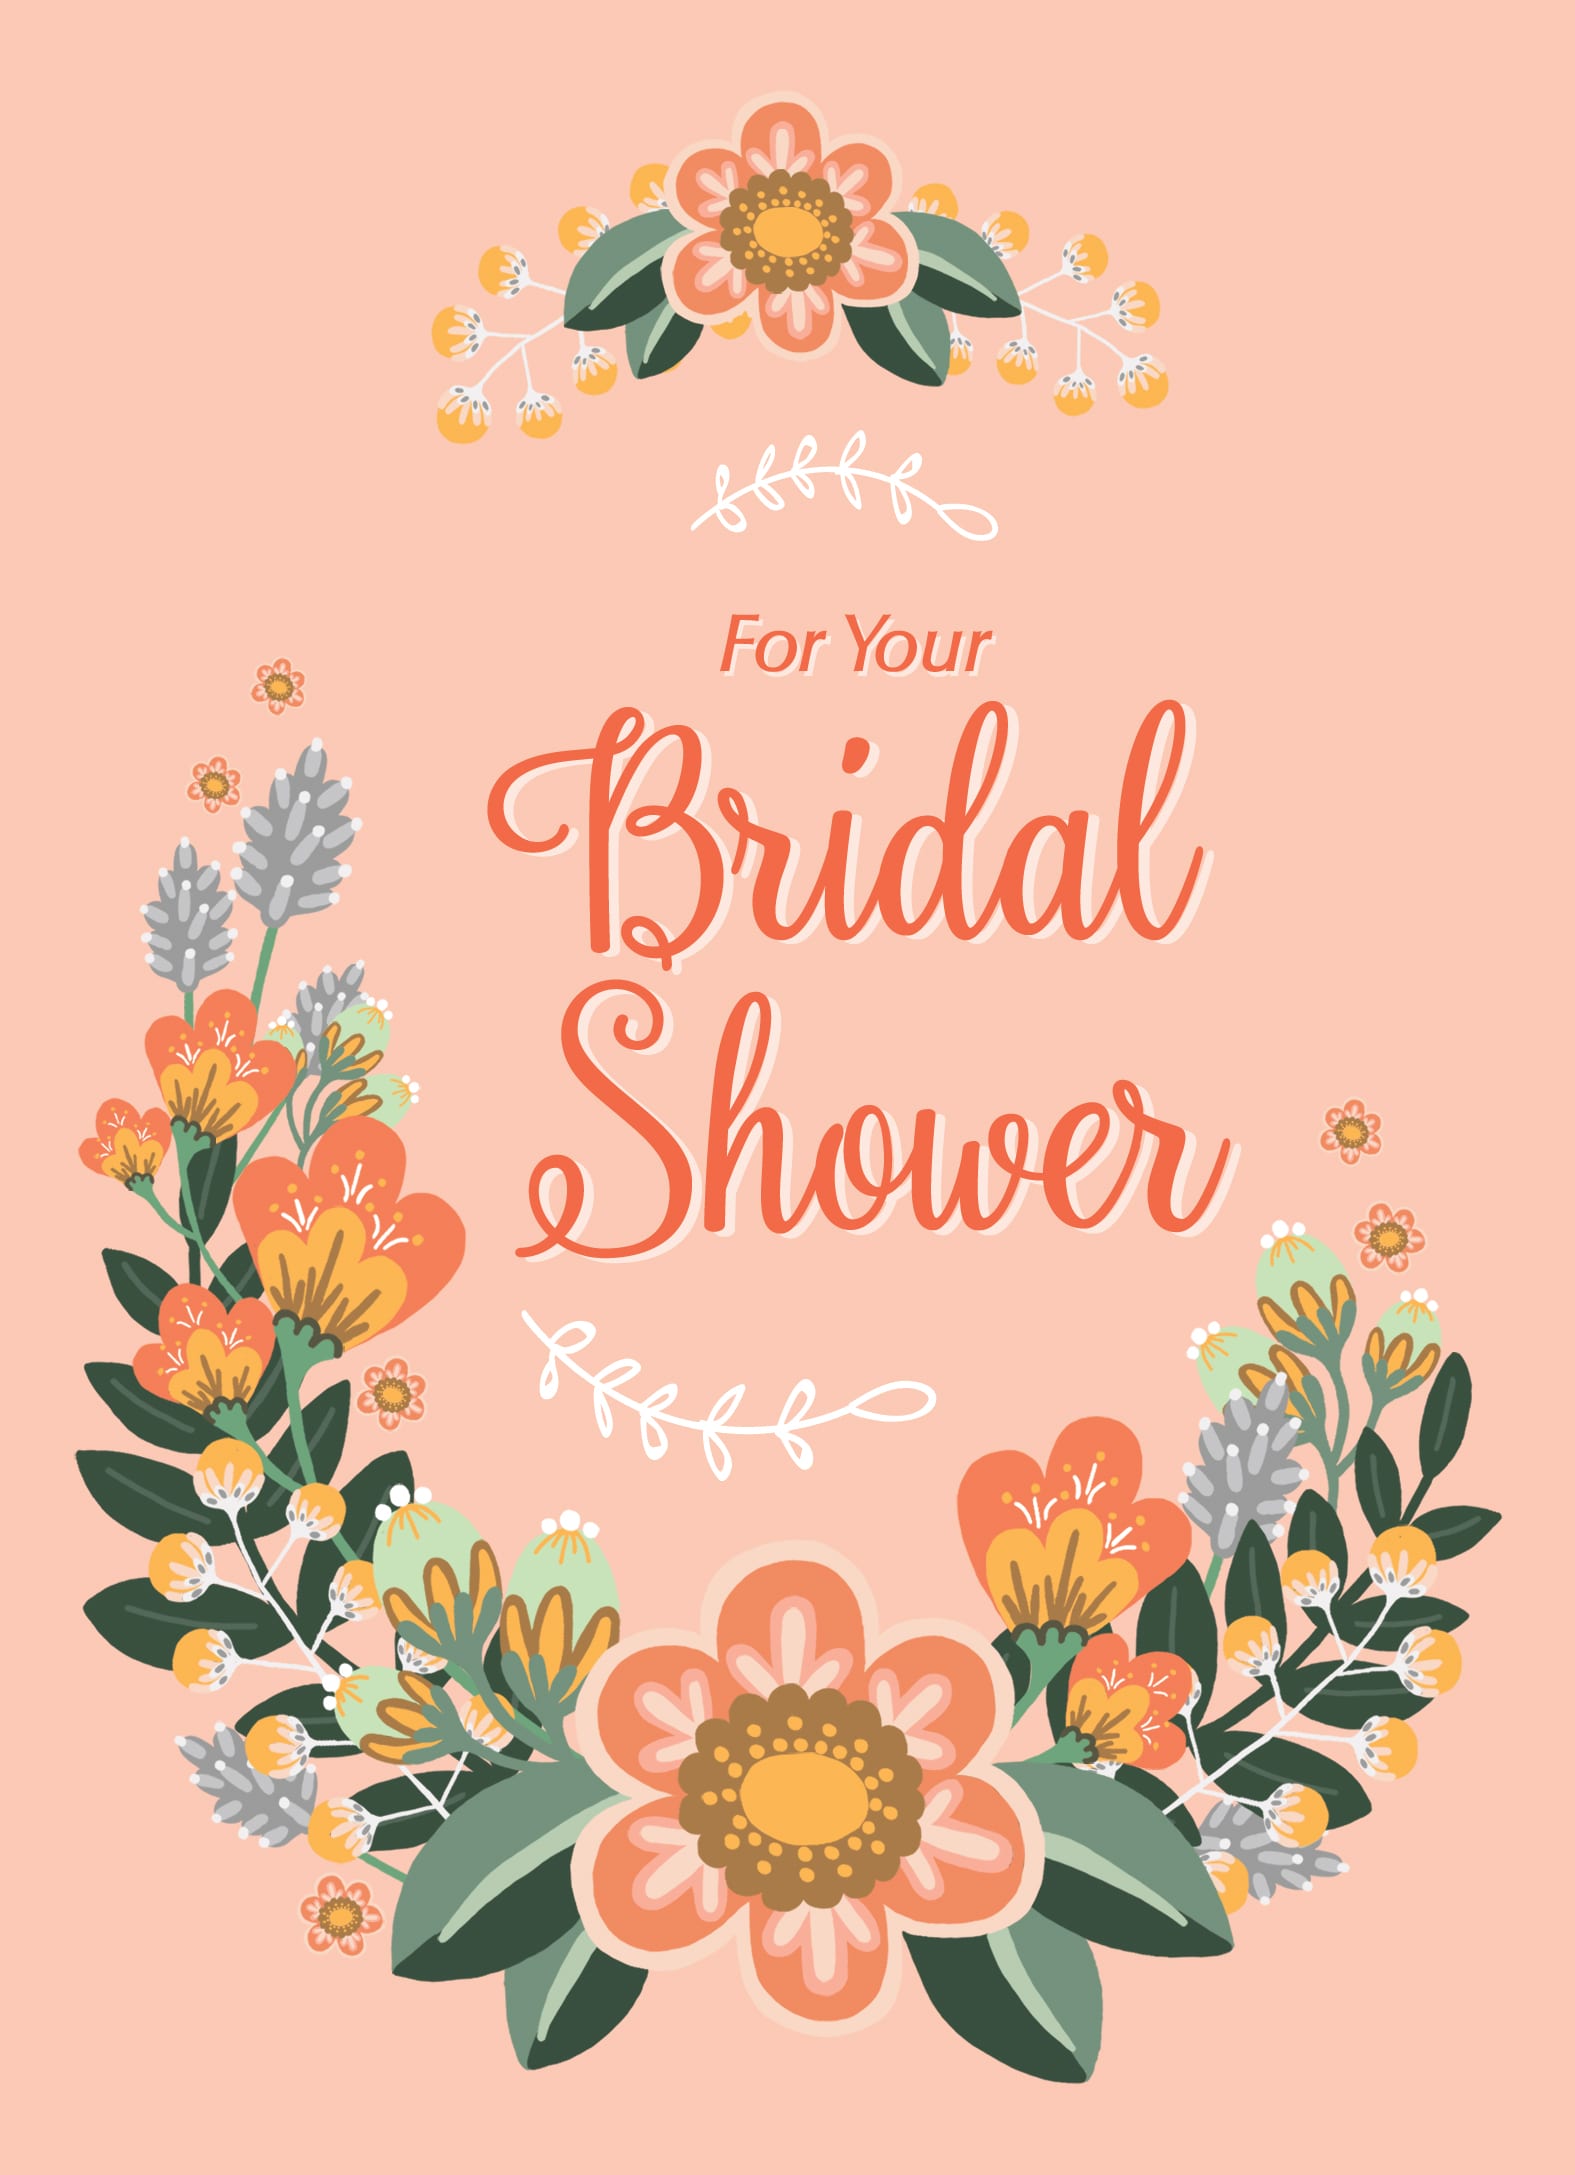 bridal-shower-cards-personalized-greeting-cards-by-thegreetingcardshop